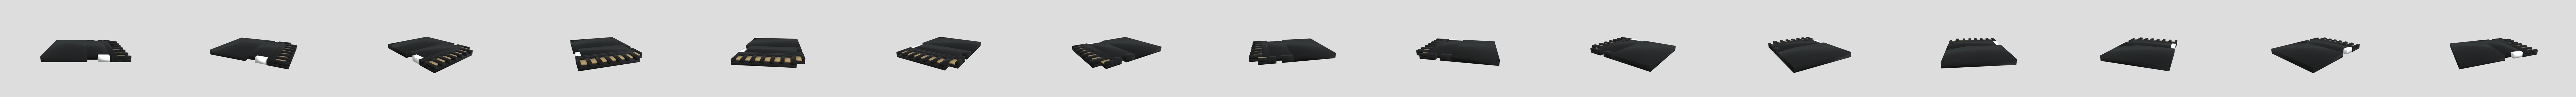 Free 3d Models Download Sd Card